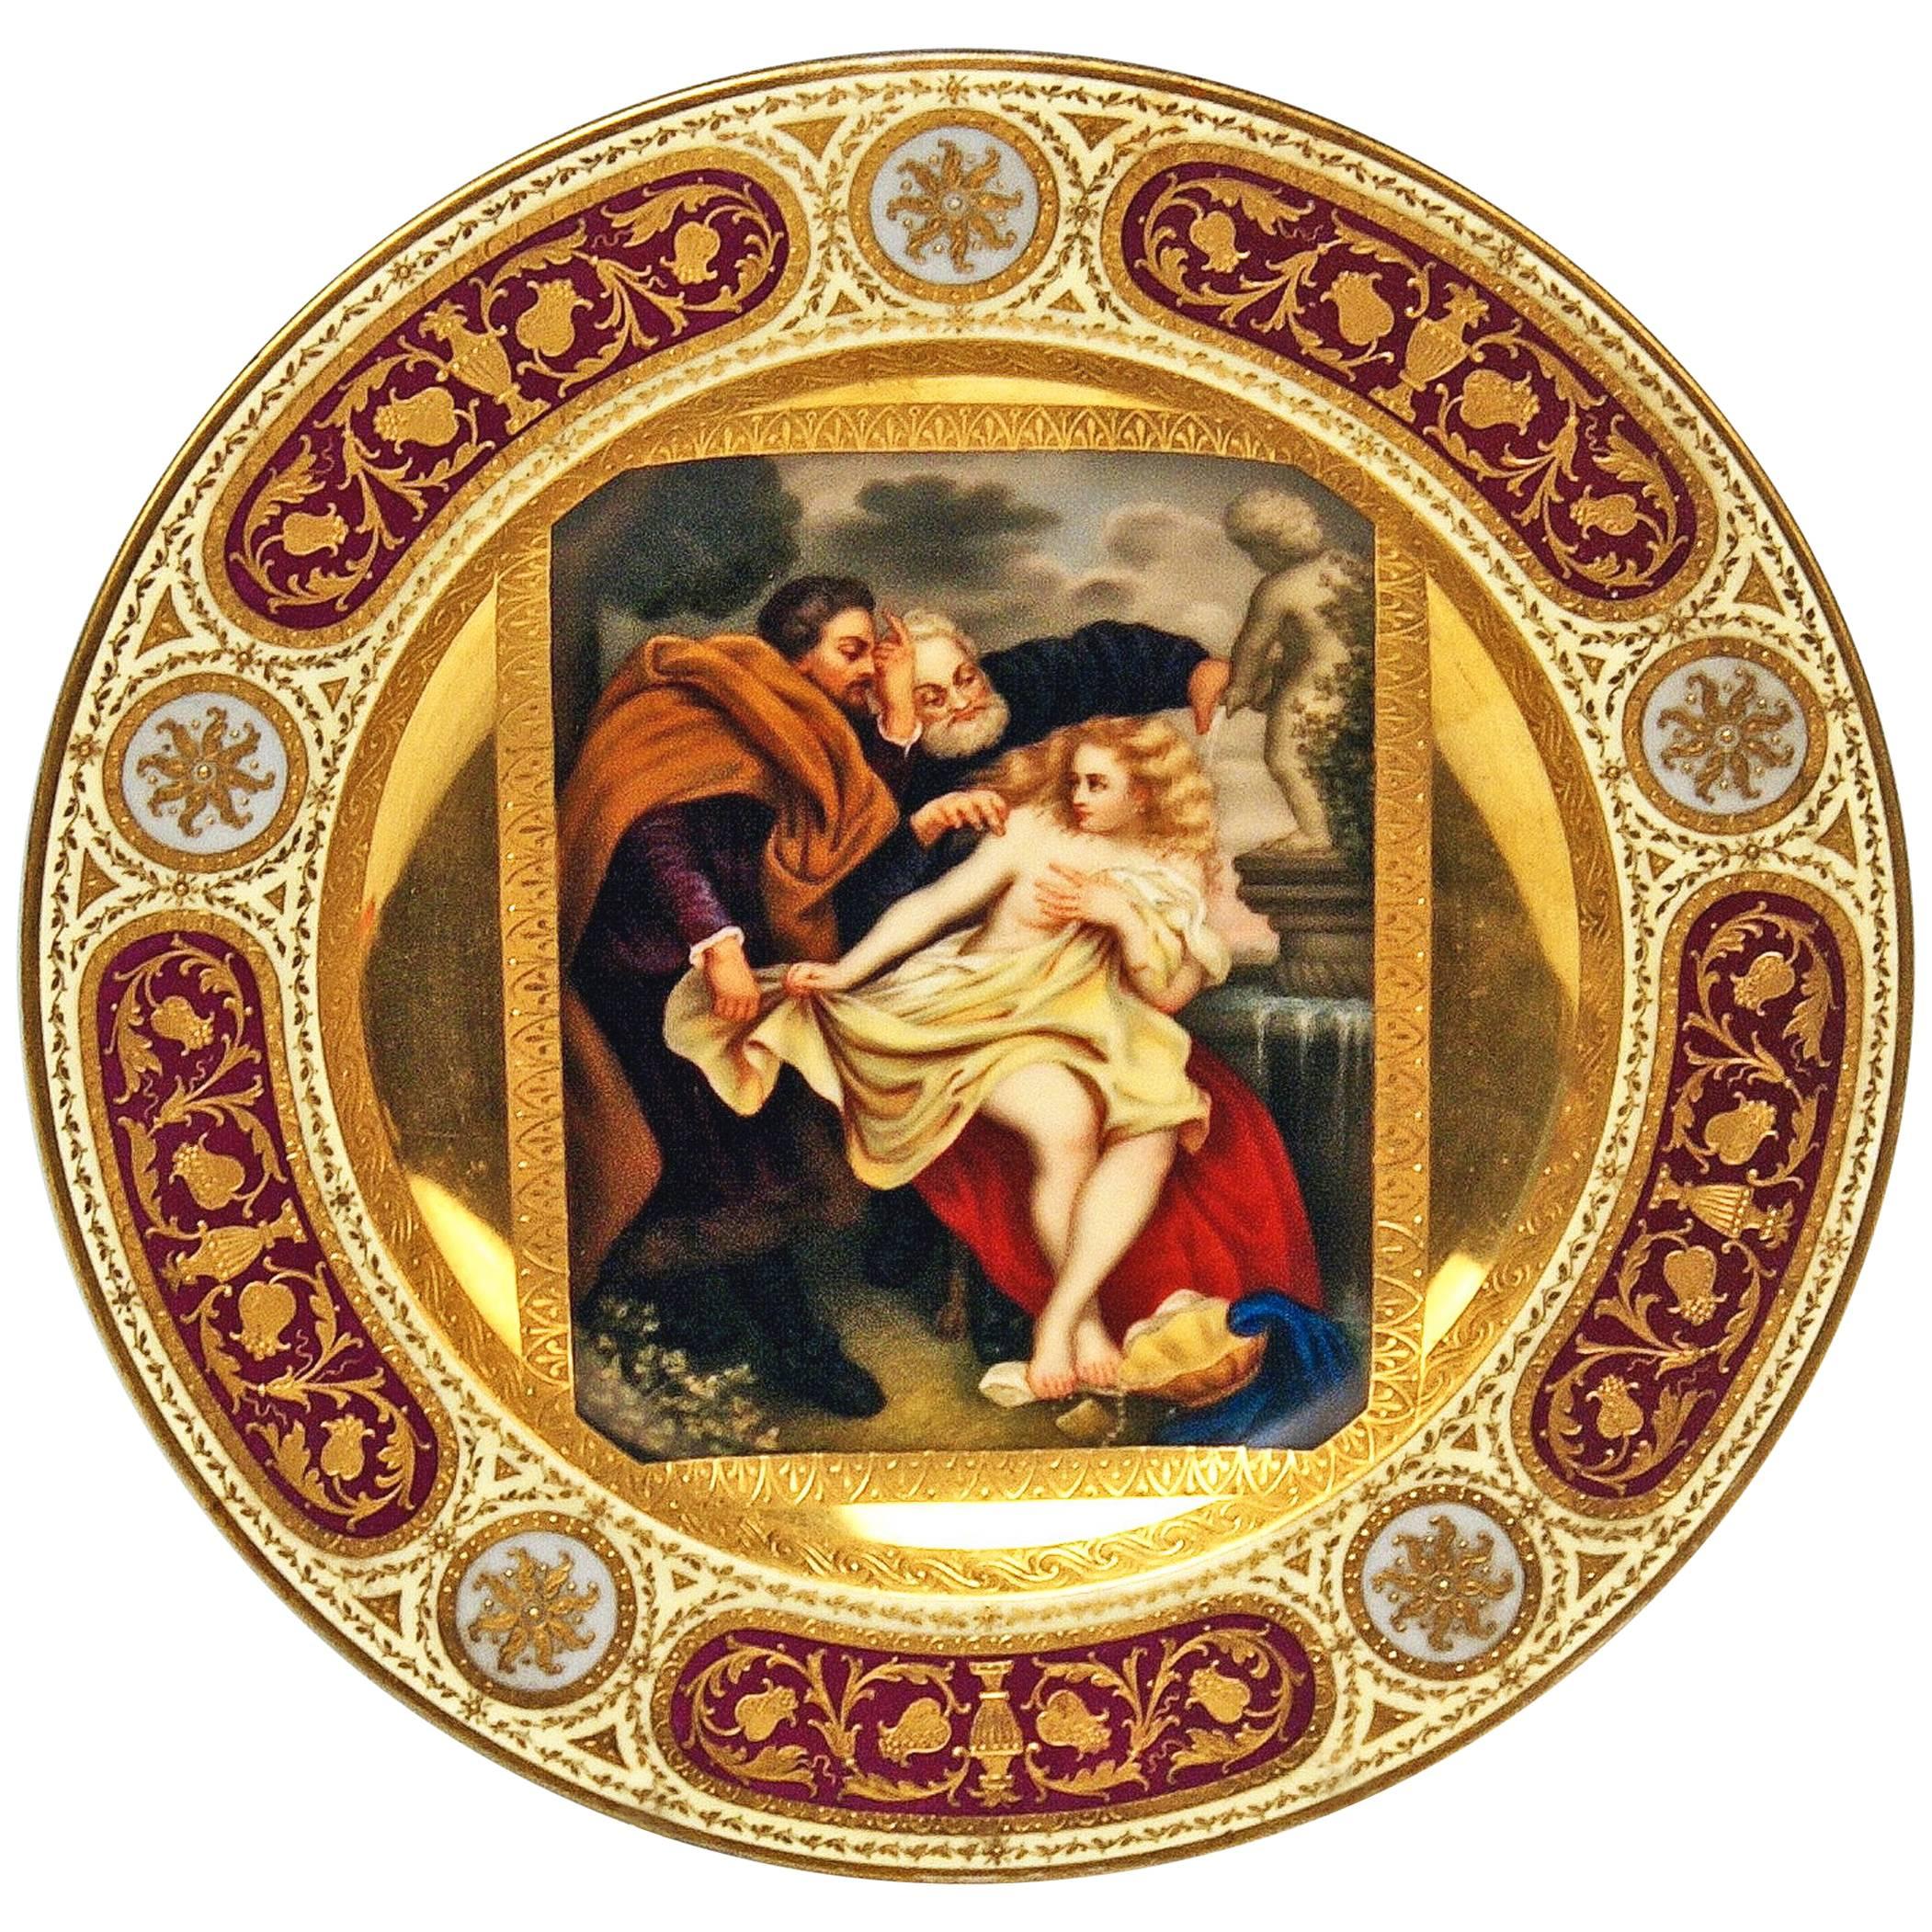 Plate Imperial Viennese Porcelain Painting Susanna and the Elders, 1813